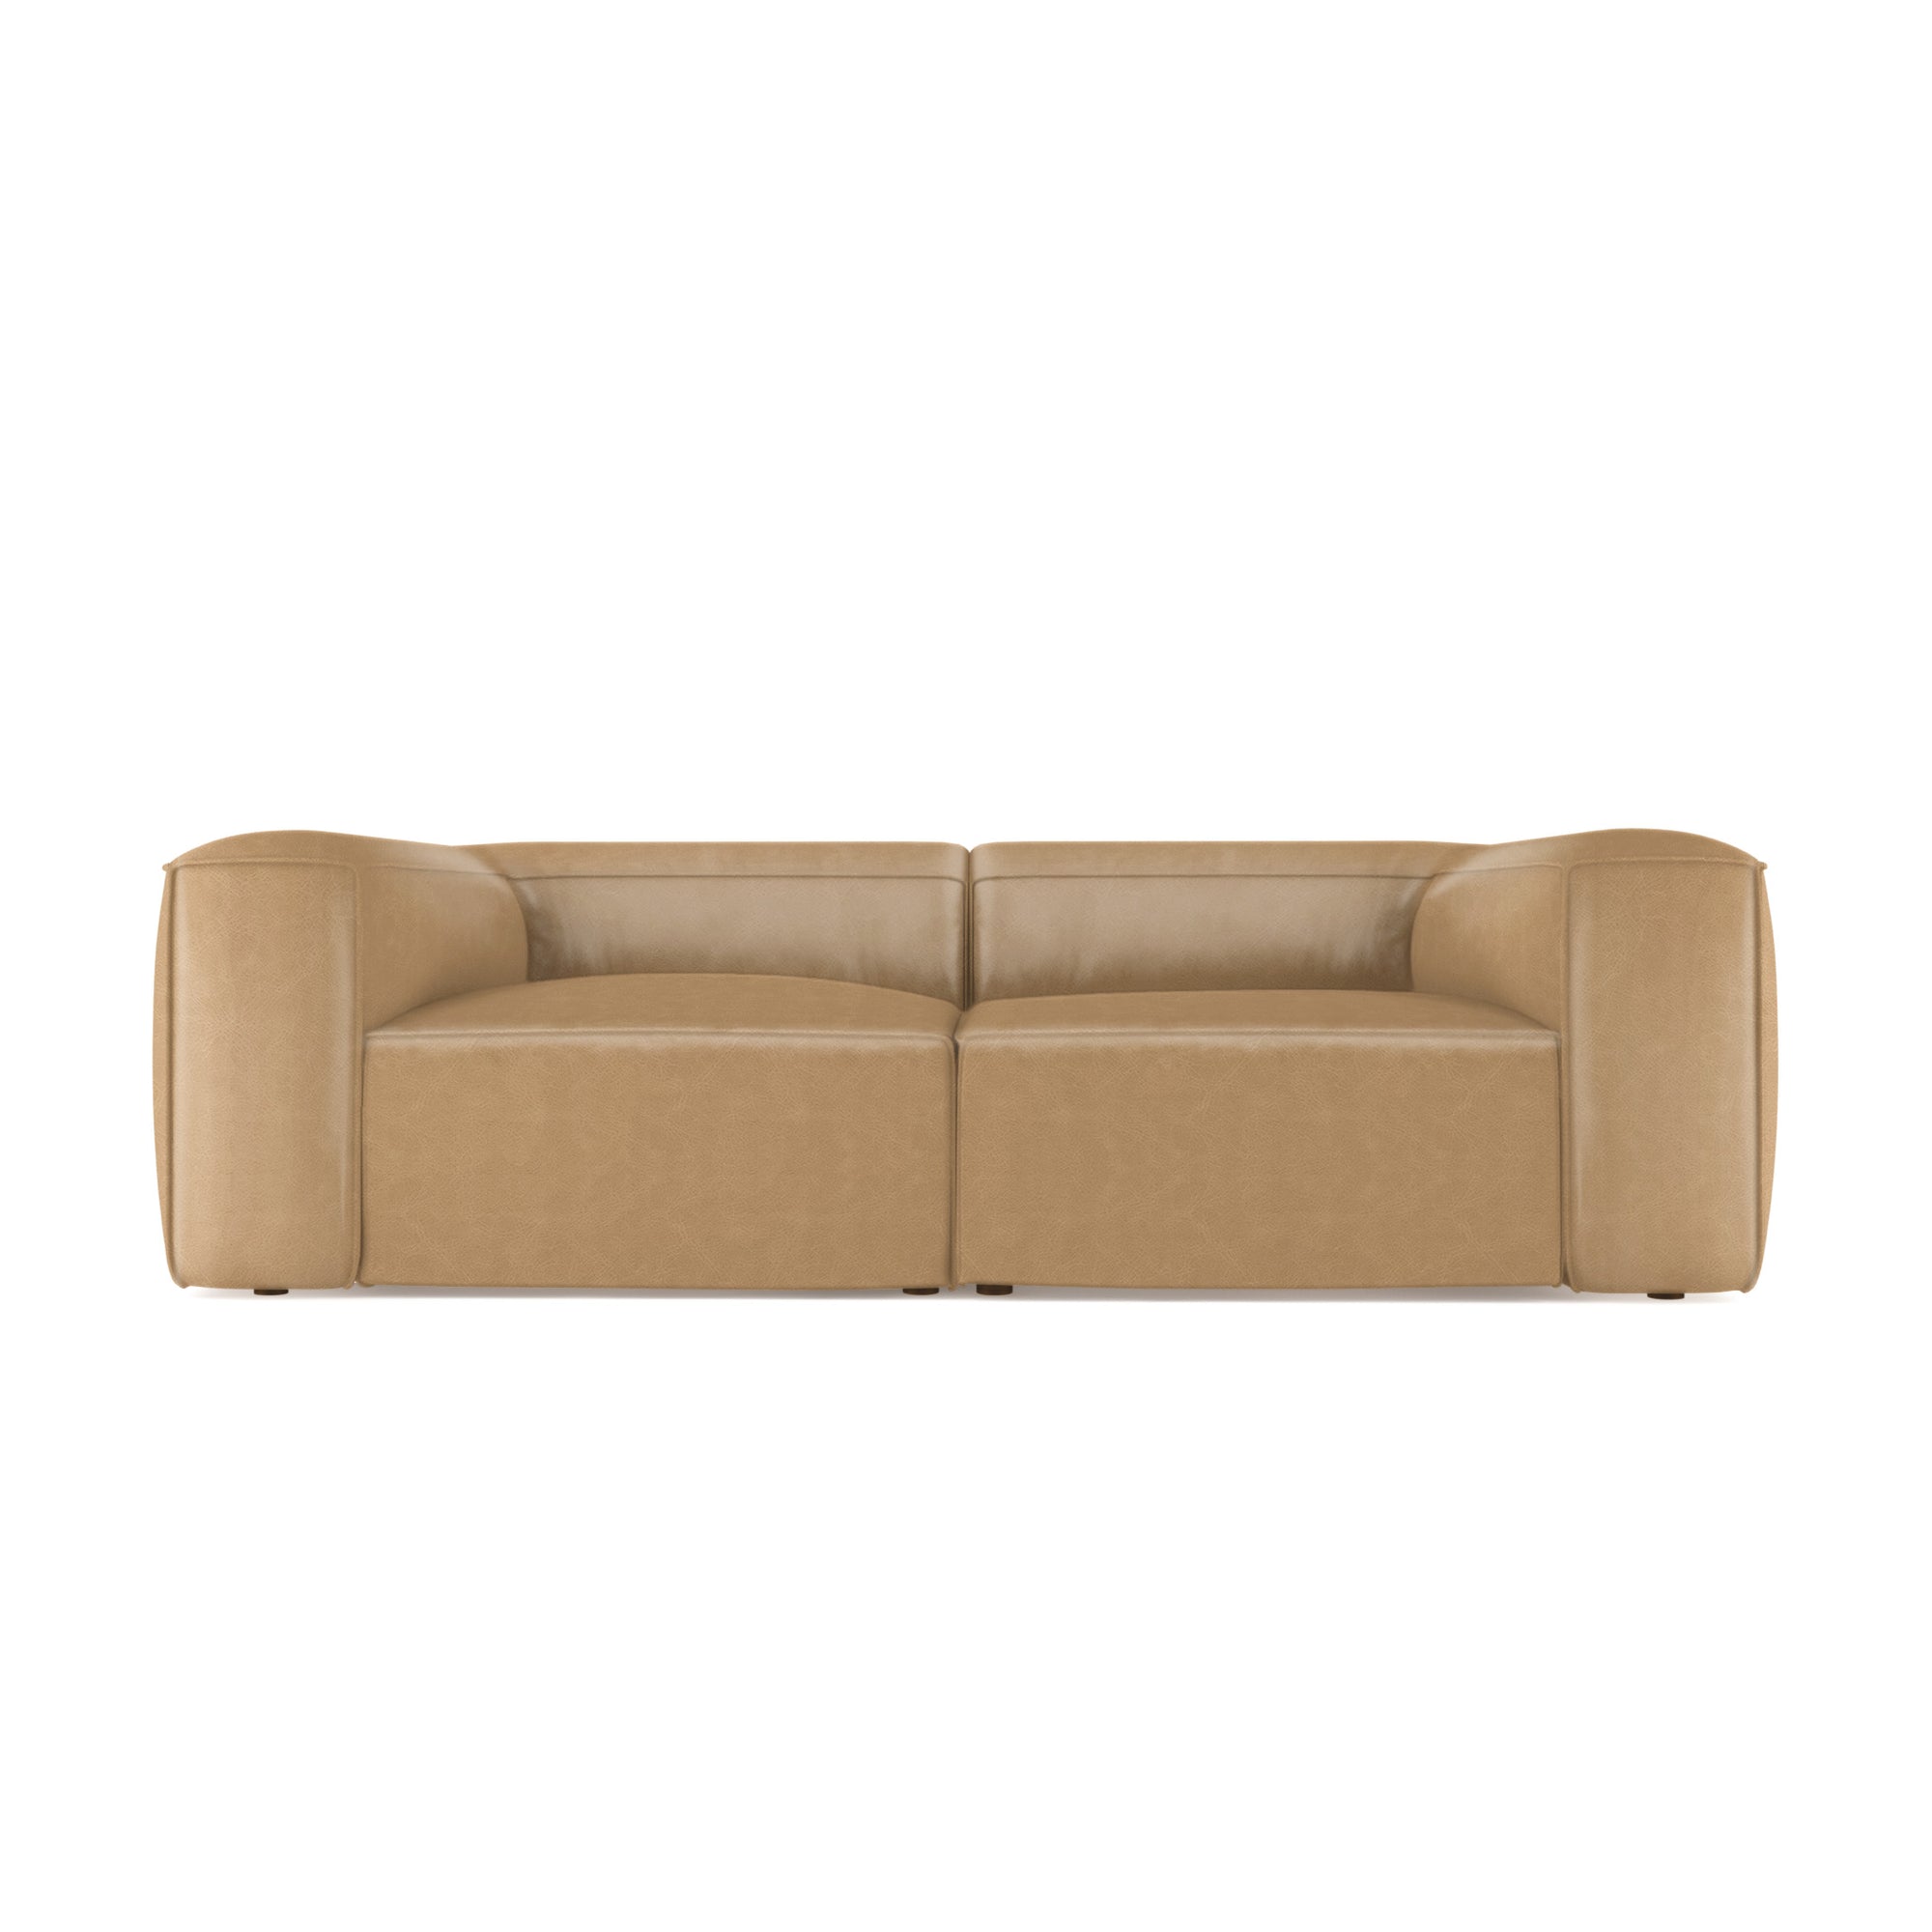 Varick Daybed - Marzipan Vintage Leather